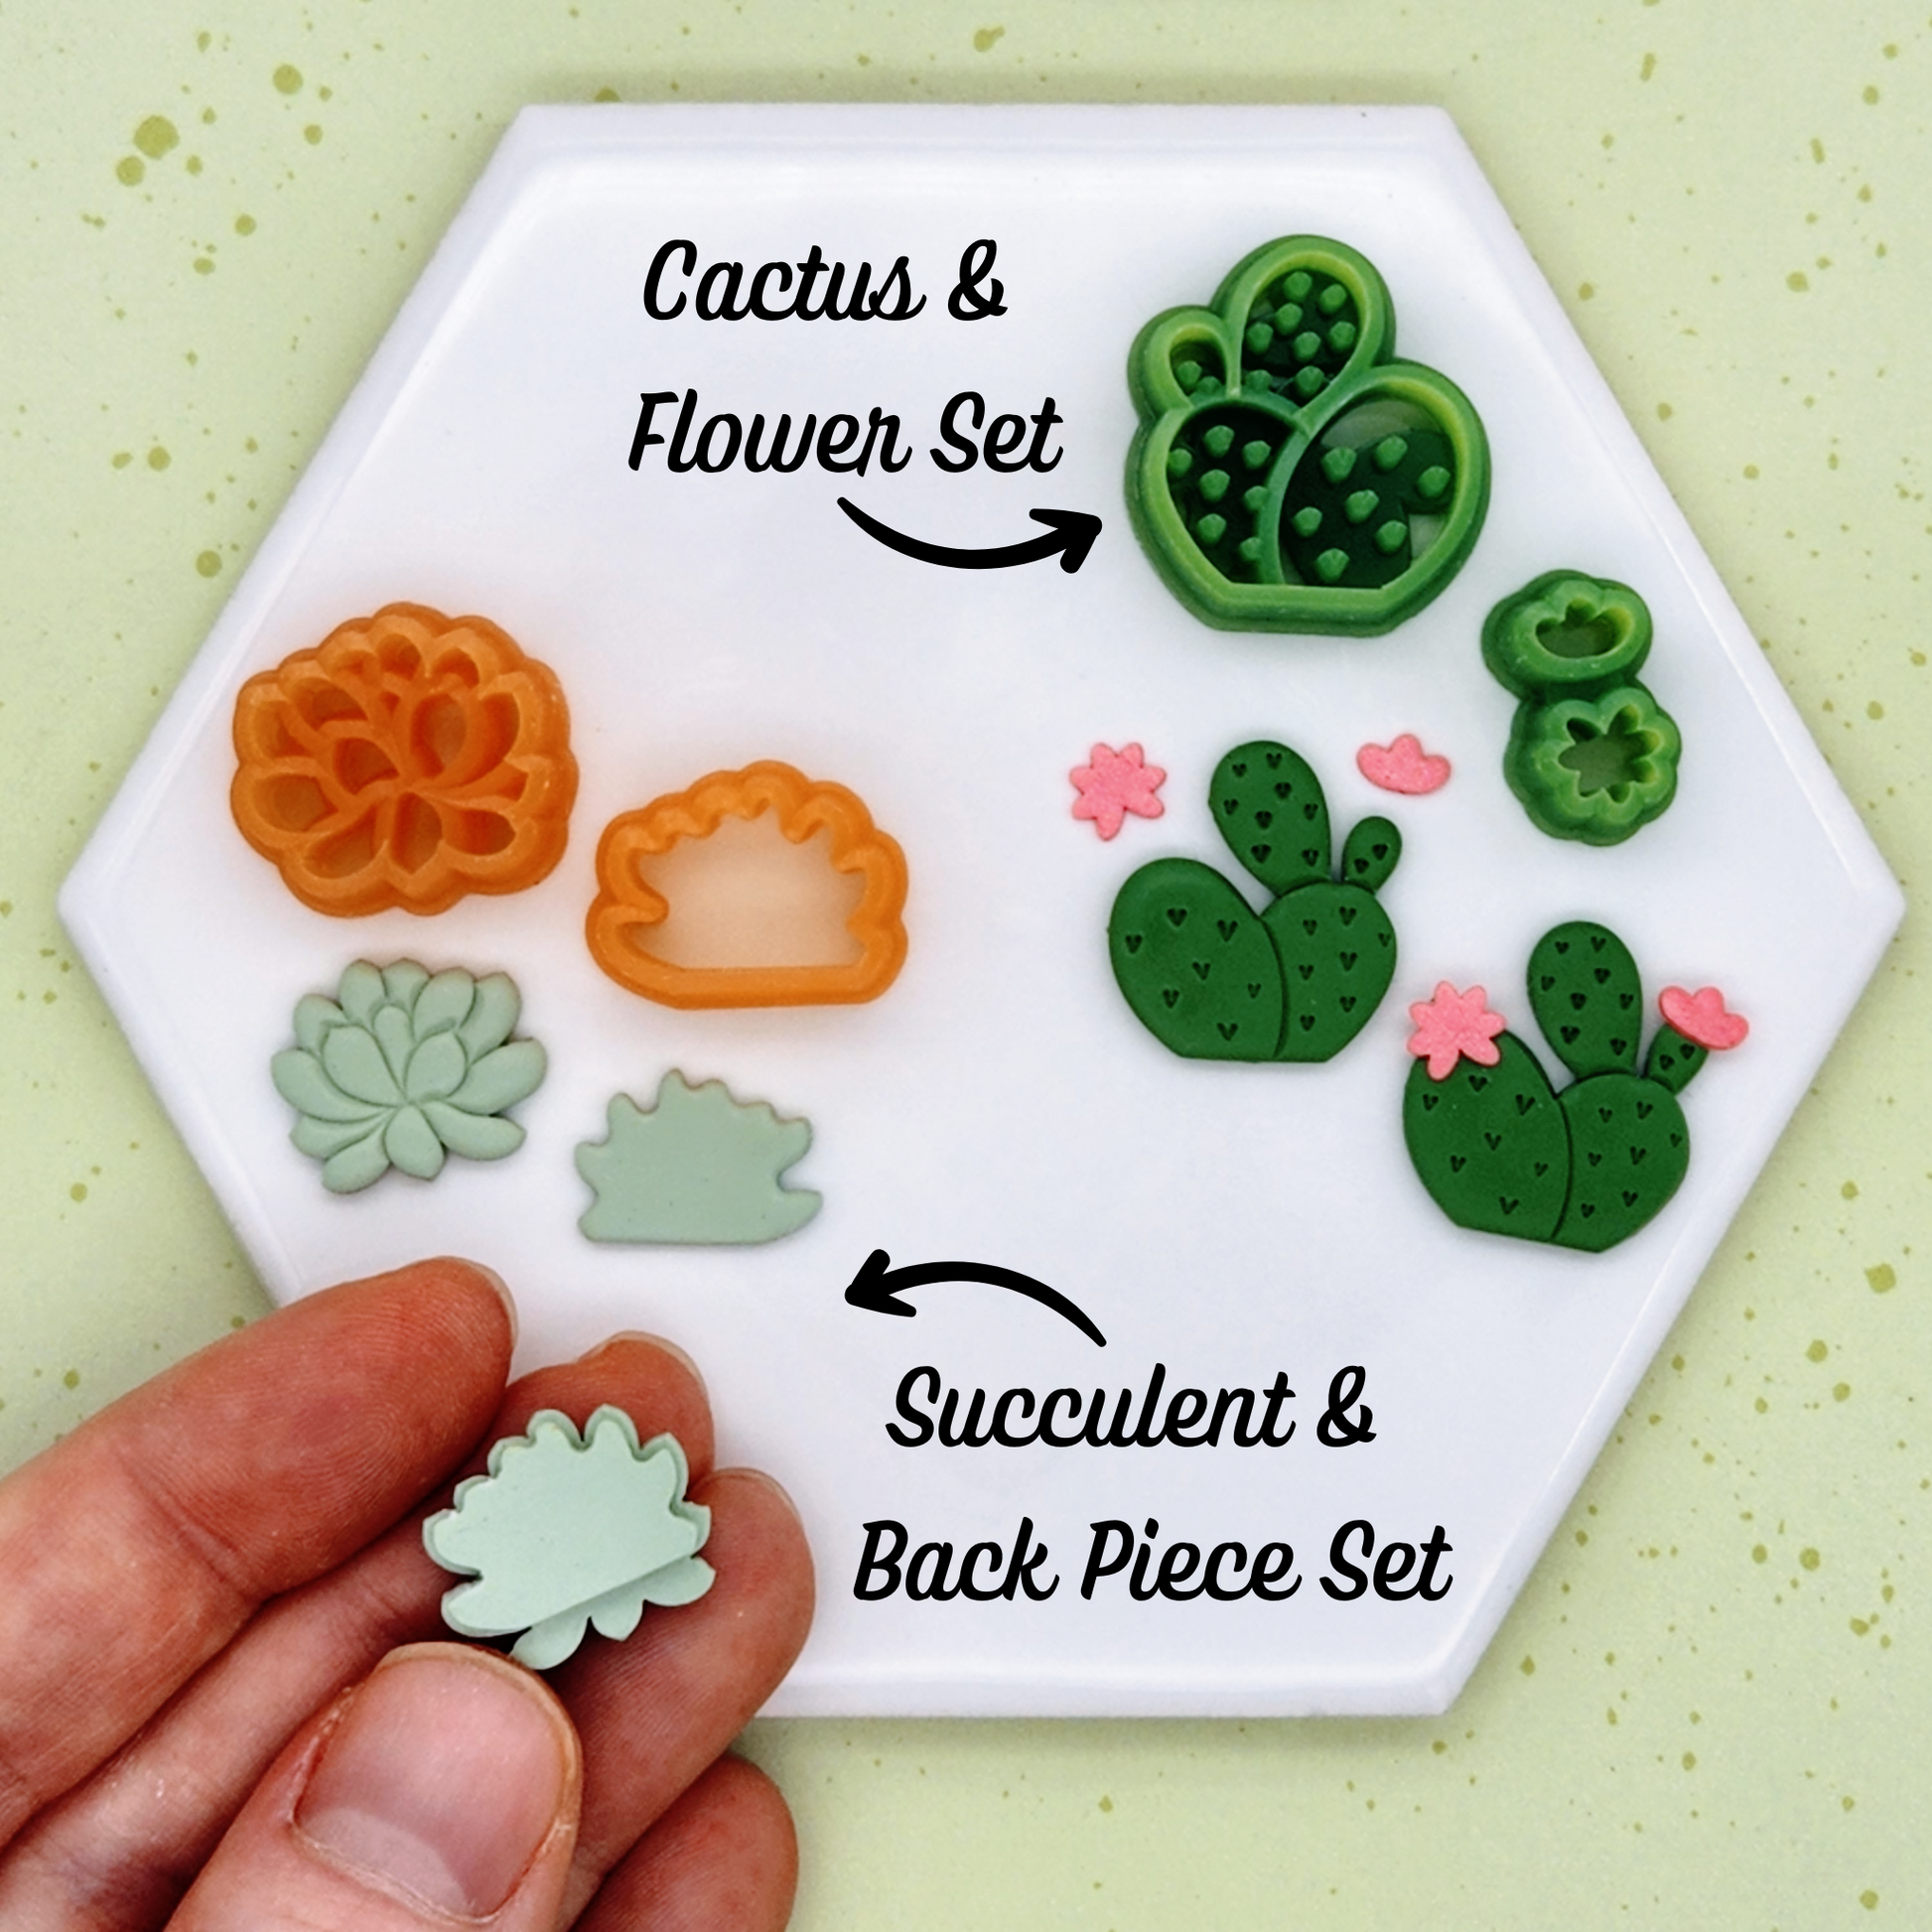 Showing clay cutters included in the Cactus and Flower Set, and Succulent and Back Piece Set, along with their respective polymer clay sample outputs